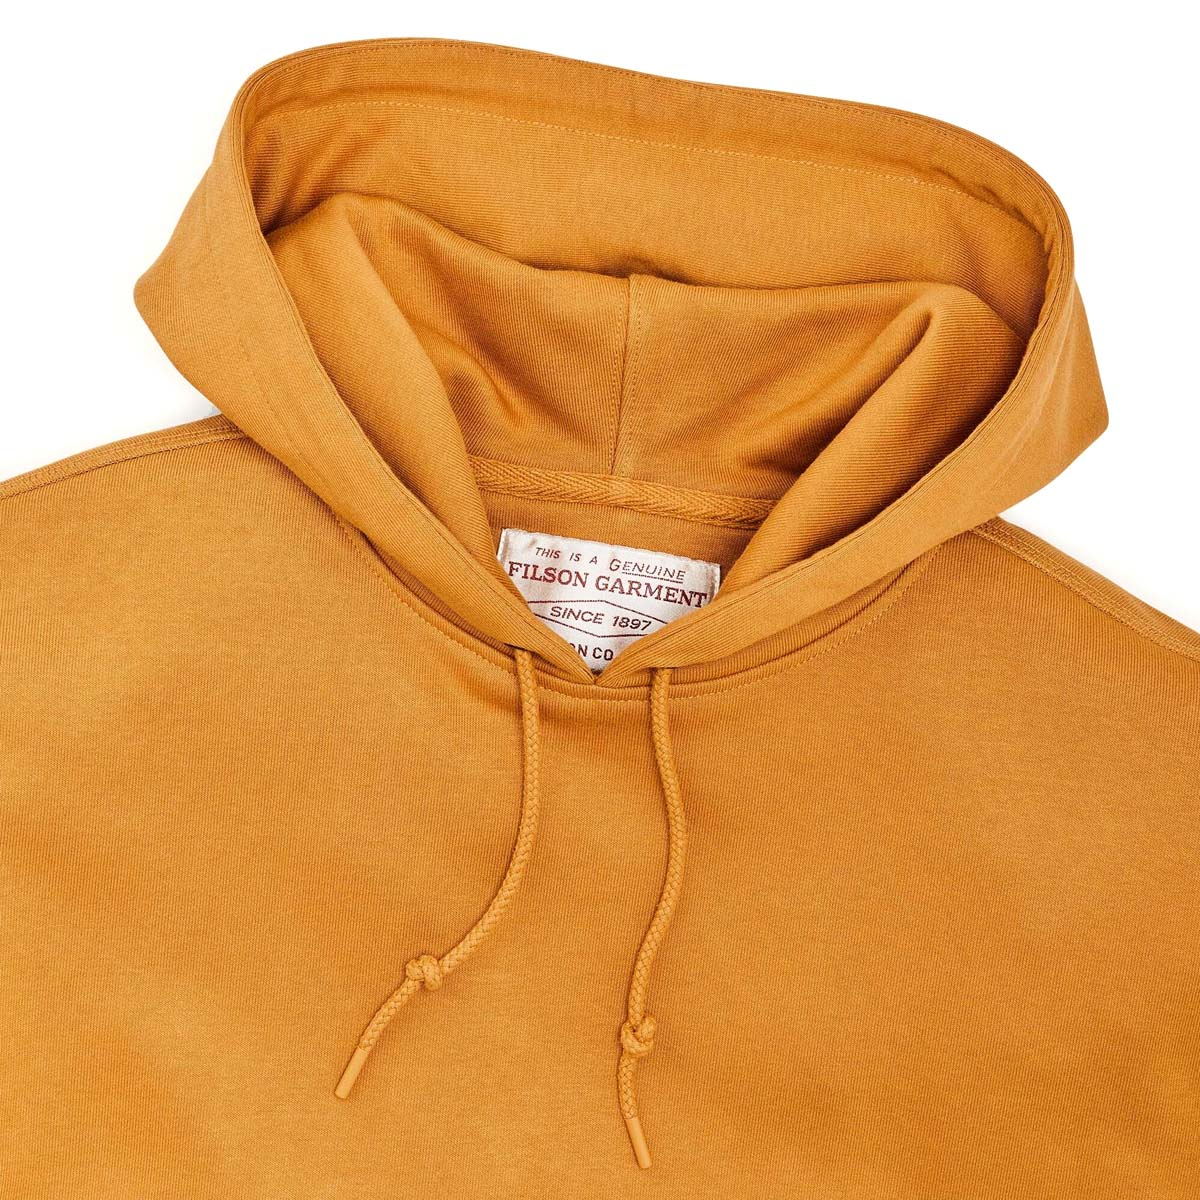 Filson Prospector Hoodie Harvest Gold, an ideal baselayer in cold weather conditions